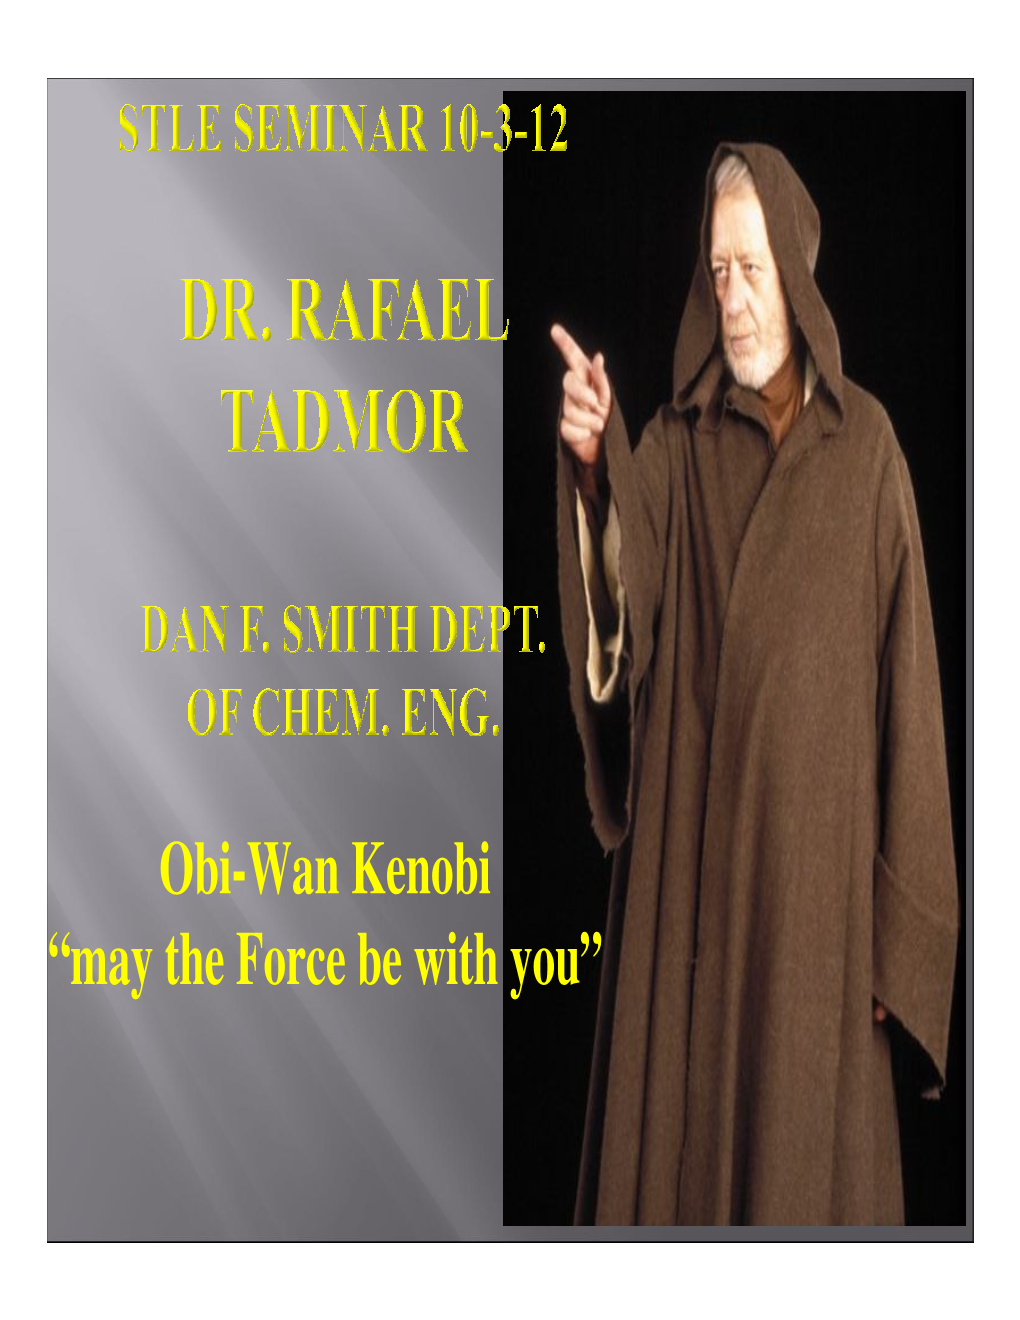 Obi-Wan Kenobi “May the Force Be with You”